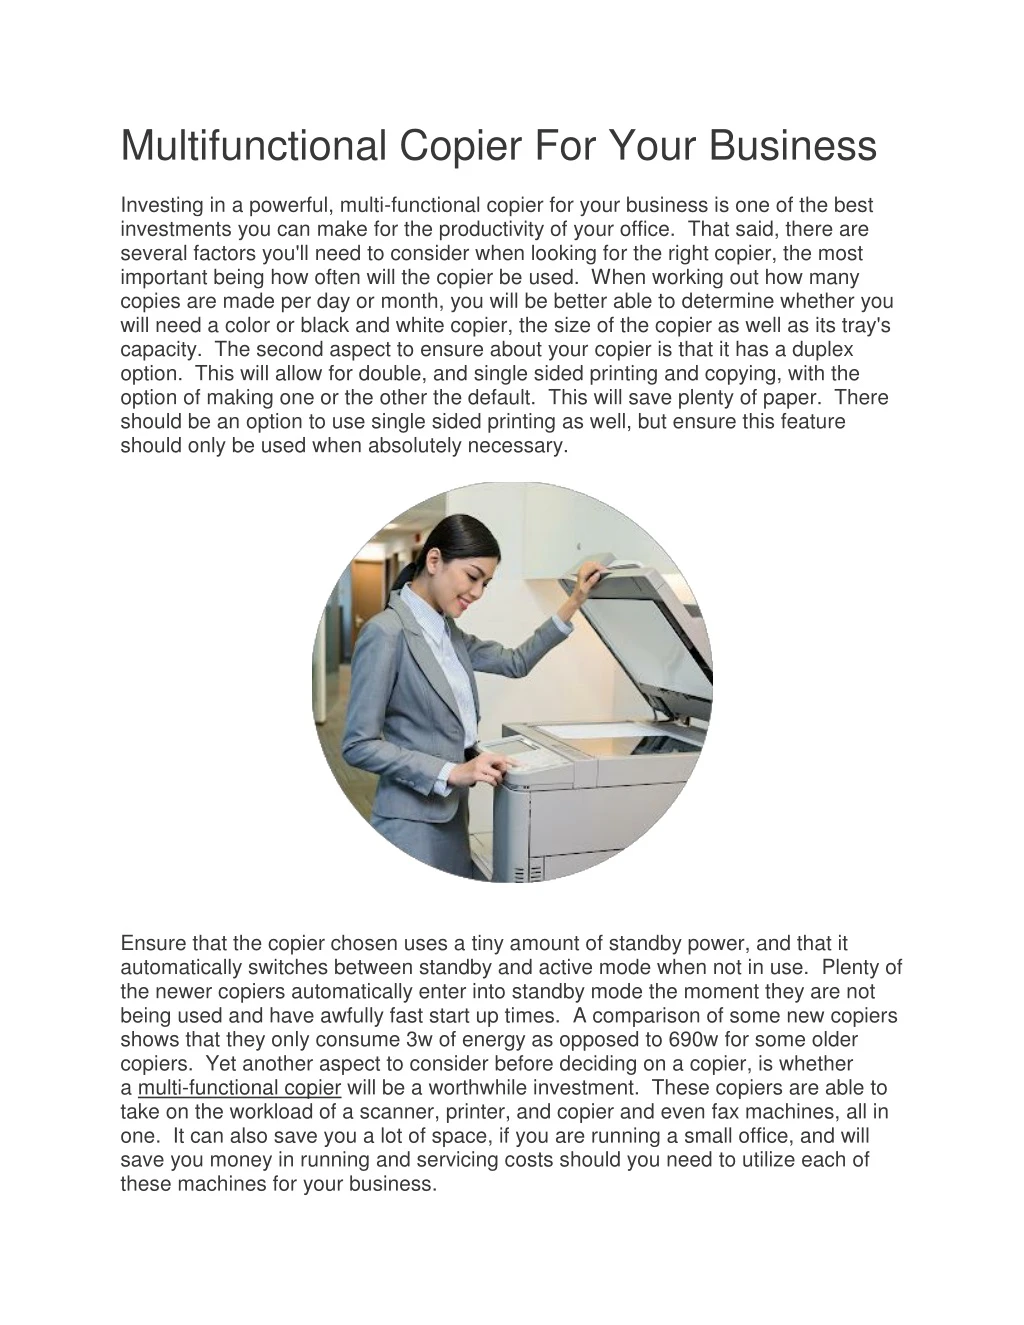 multifunctional copier for your business